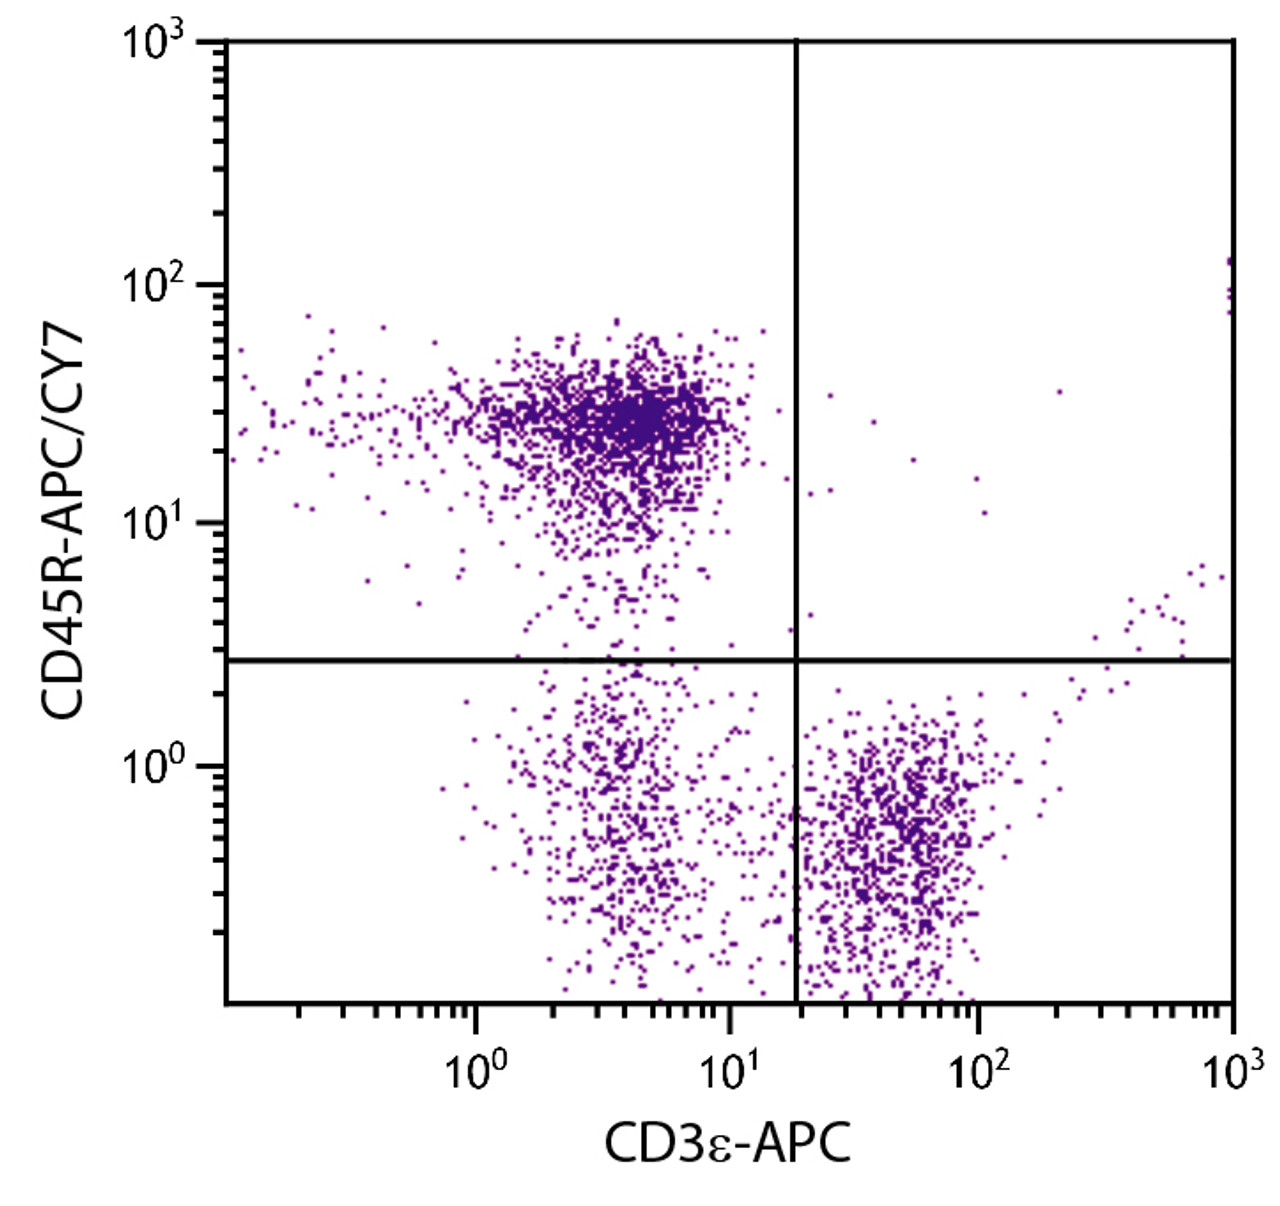 BALB/c mouse splenocytes were stained with Rat Anti-Mouse CD45R-APC/CY7 (Cat. No. 98-797) and Rat Anti-Mouse CD3?-APC .